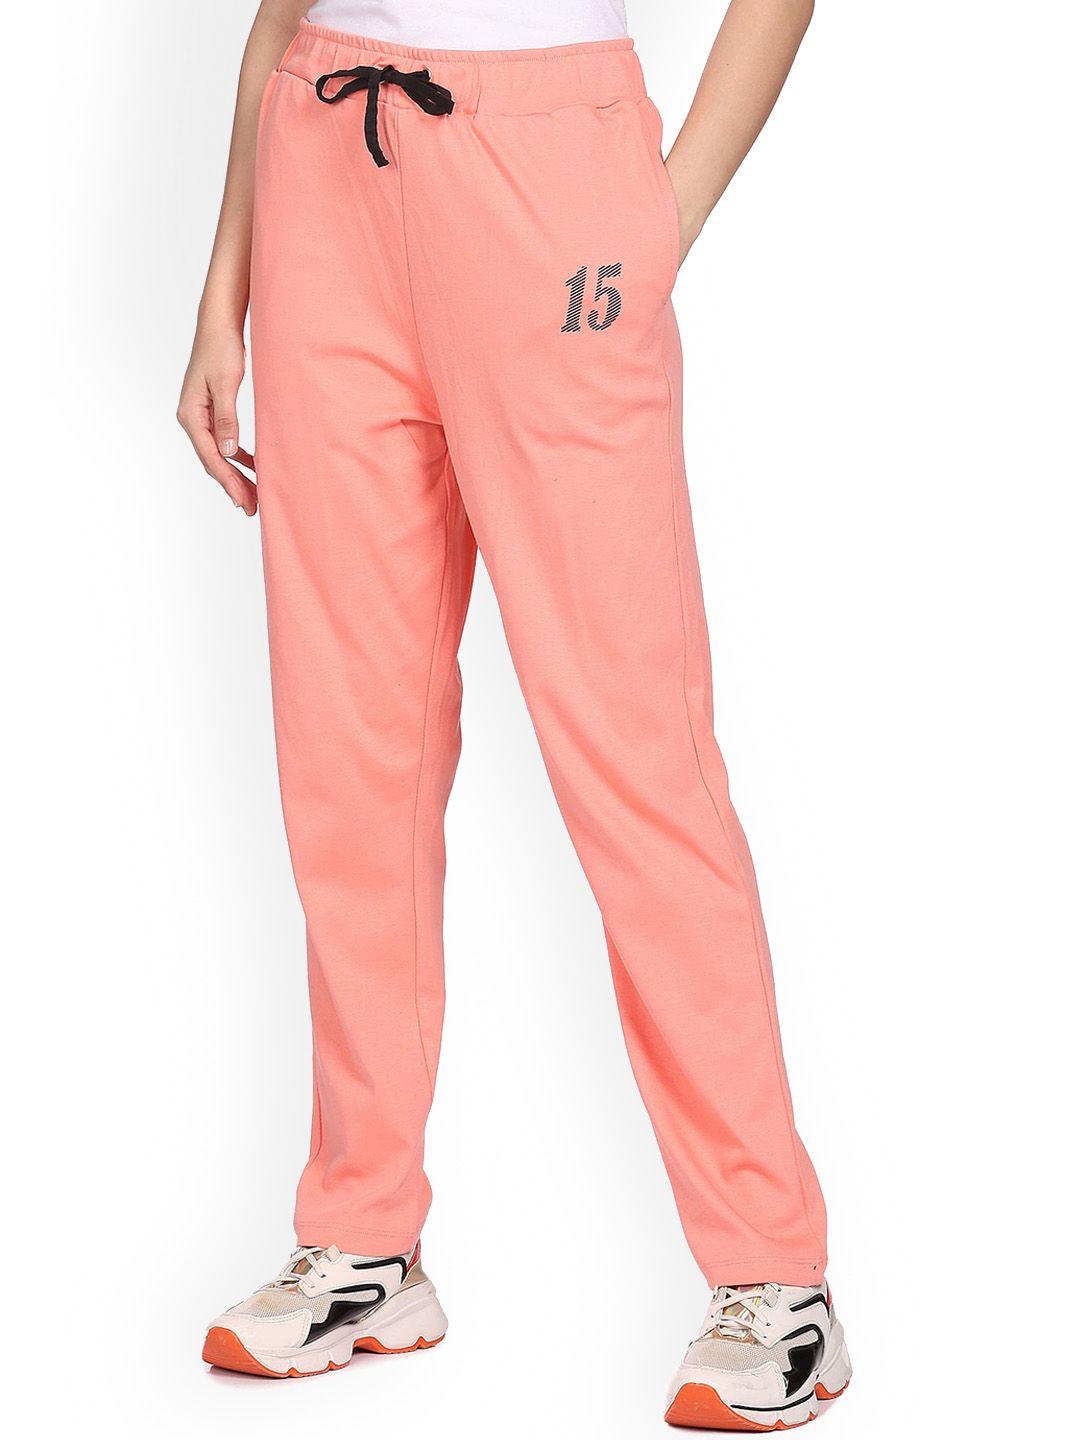 sugr-women-coral-track-pants